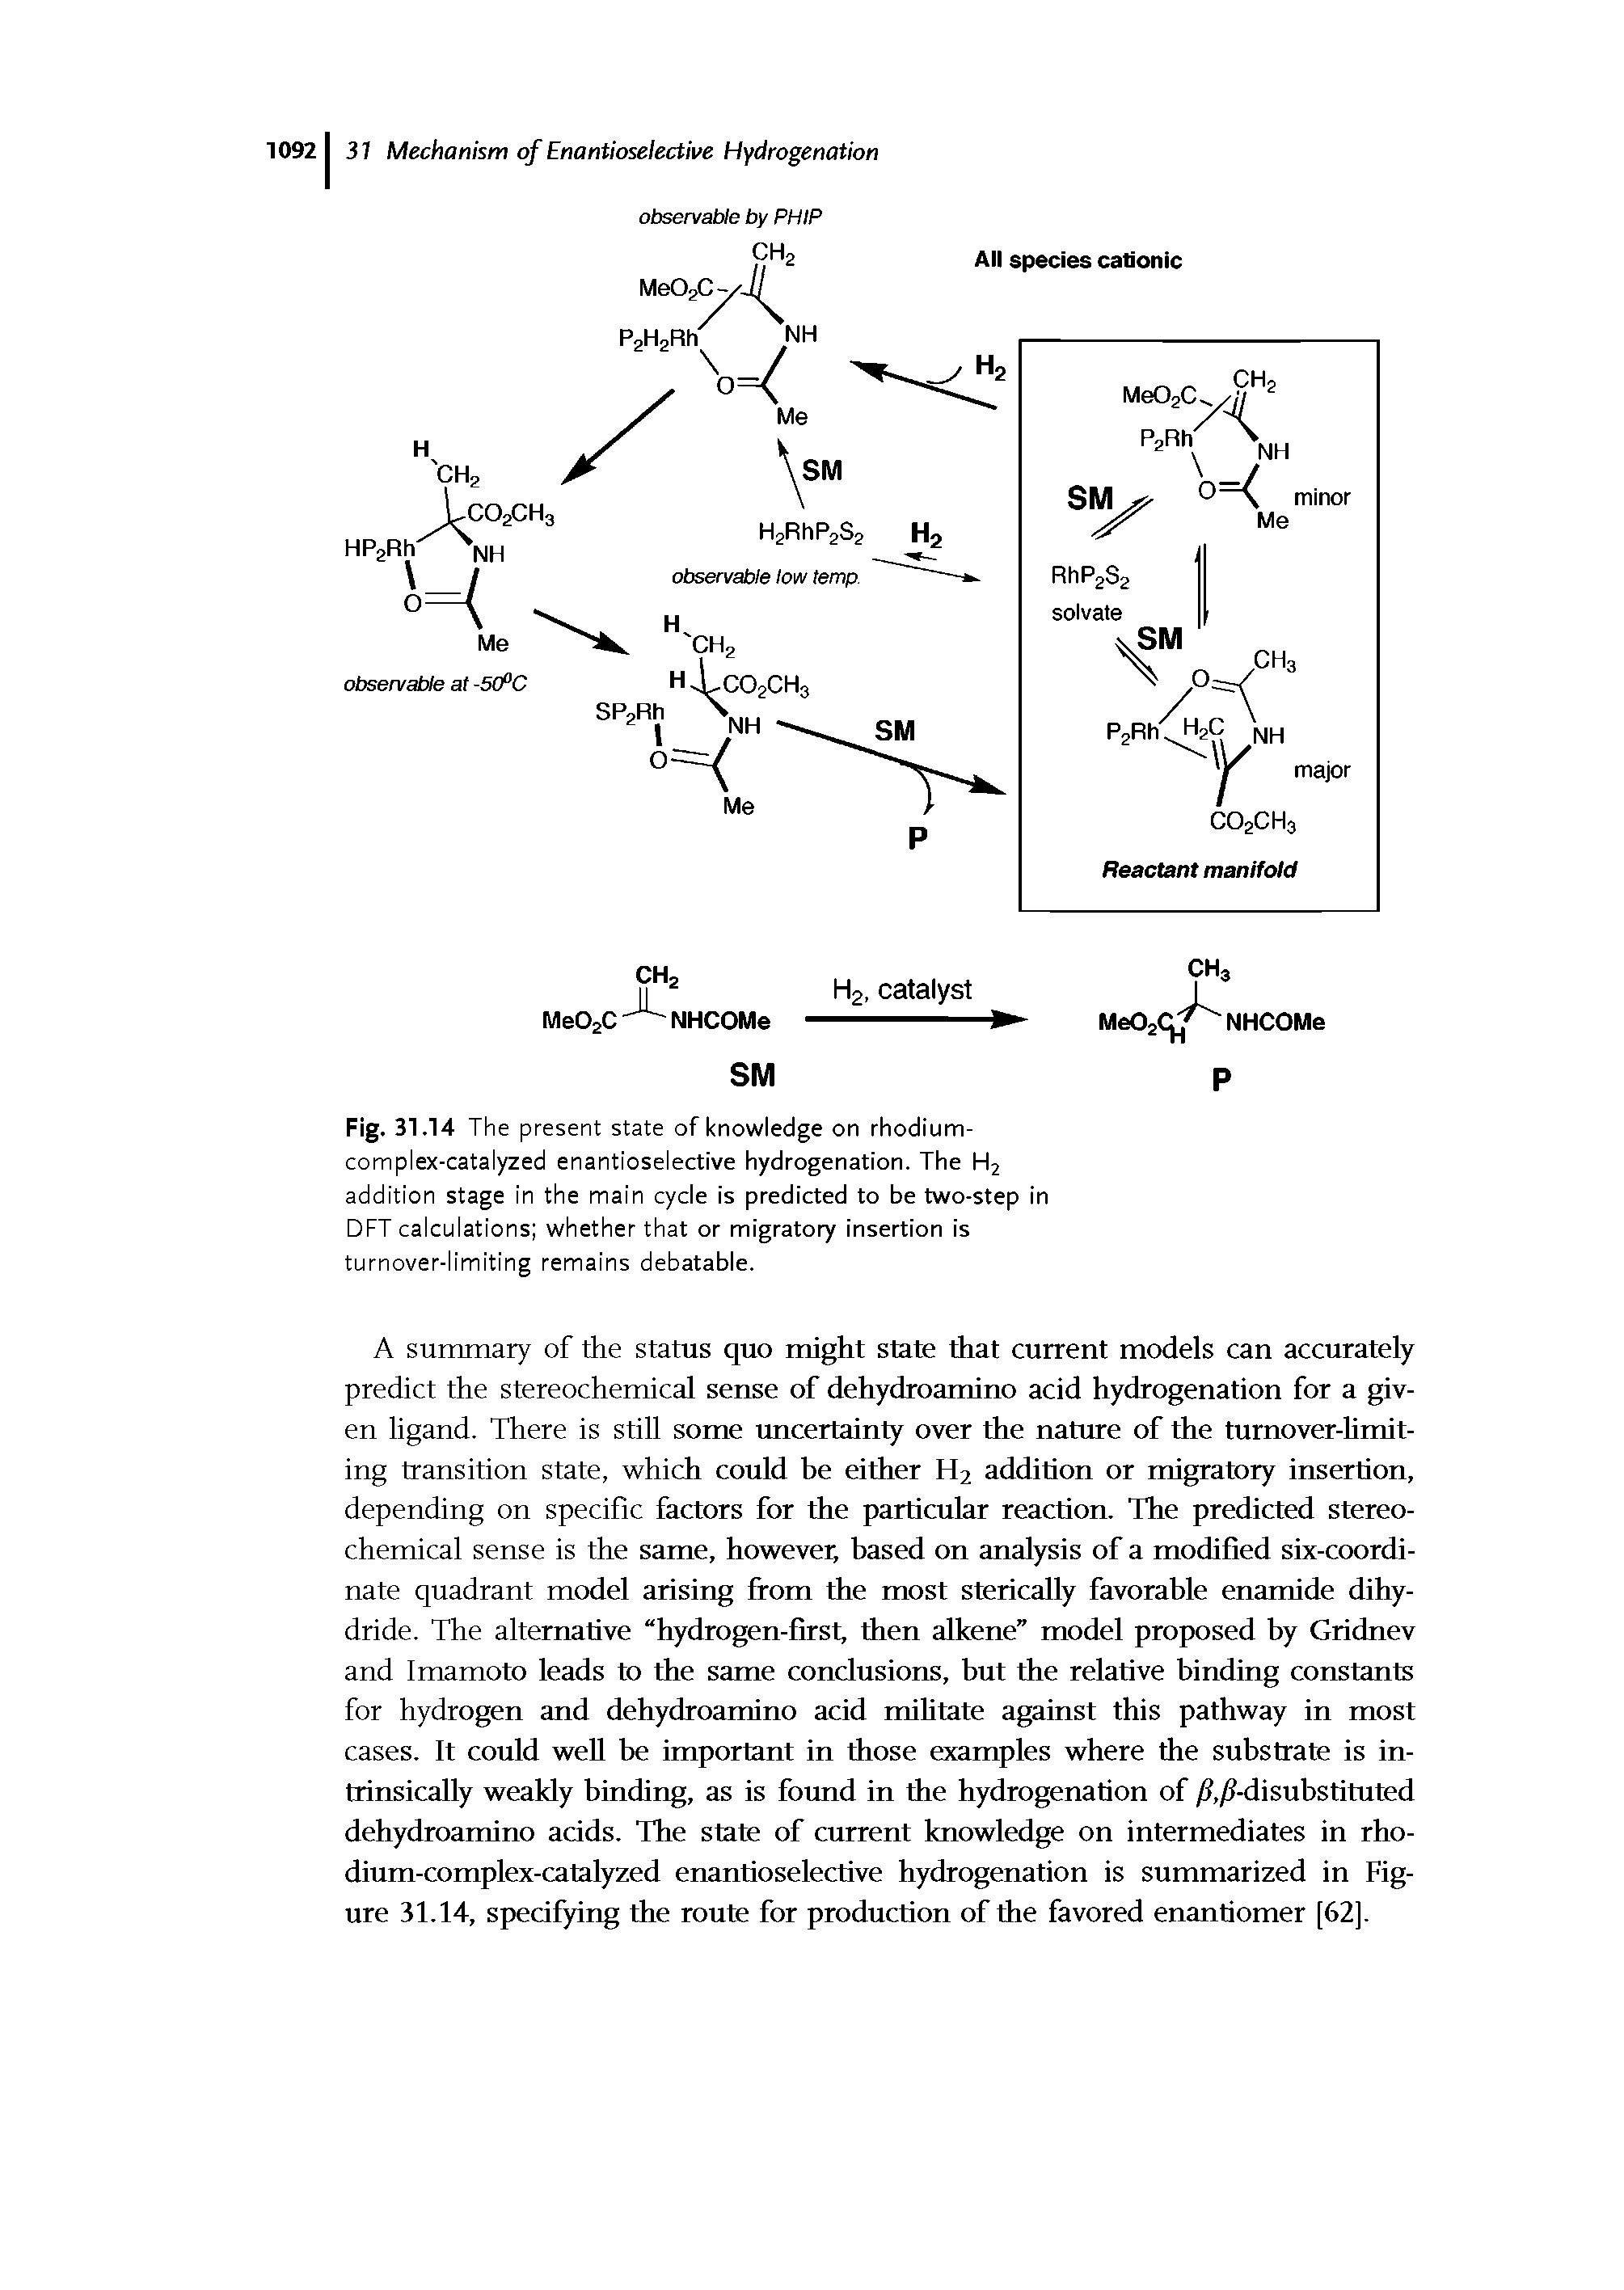 Fig. 31.14 The present state of knowledge on rhodium-complex-catalyzed enantioselective hydrogenation. The H2 addition stage in the main cycle is predicted to be two-step in DFT calculations whether that or migratory insertion is turnover-limiting remains debatable.